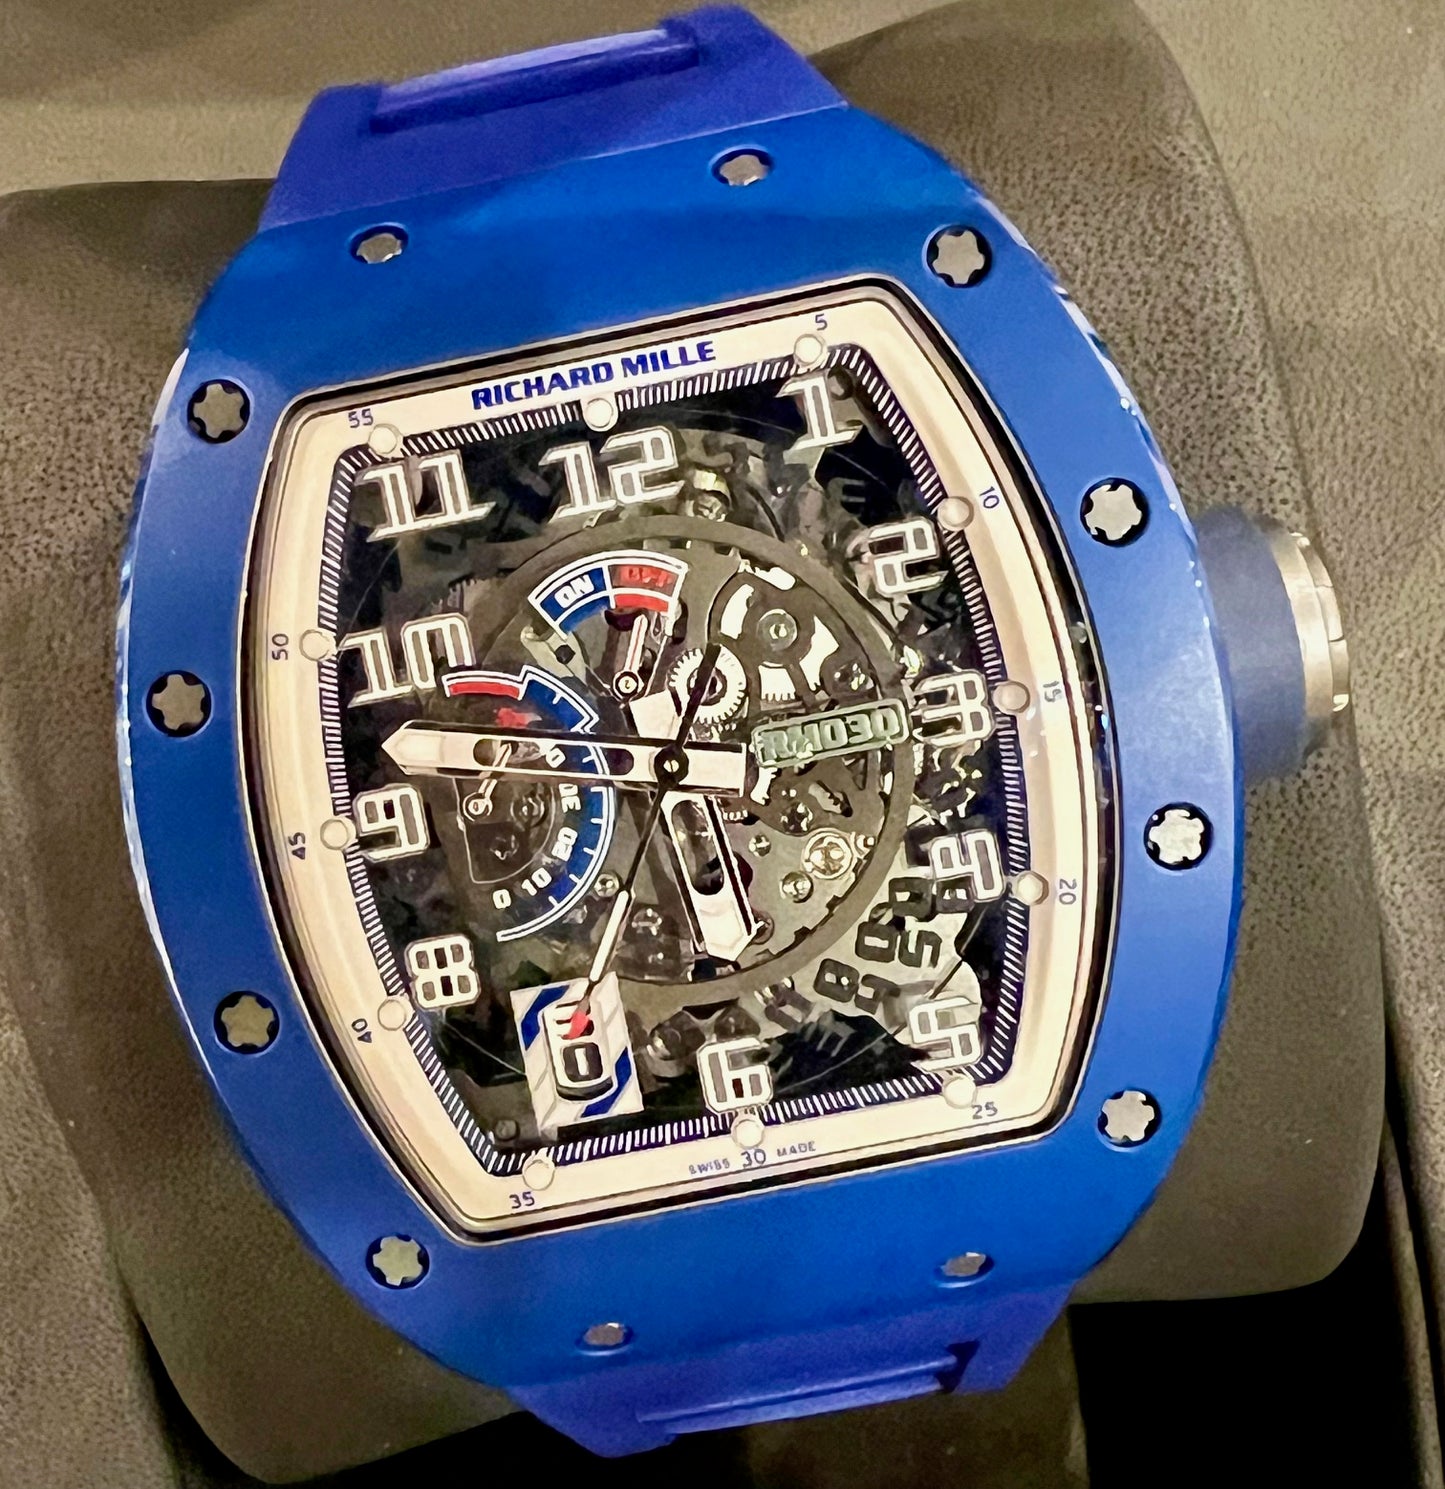 Richard Mille Rm 030 blue Boutique Edition limited 100PZ 2018 Like new